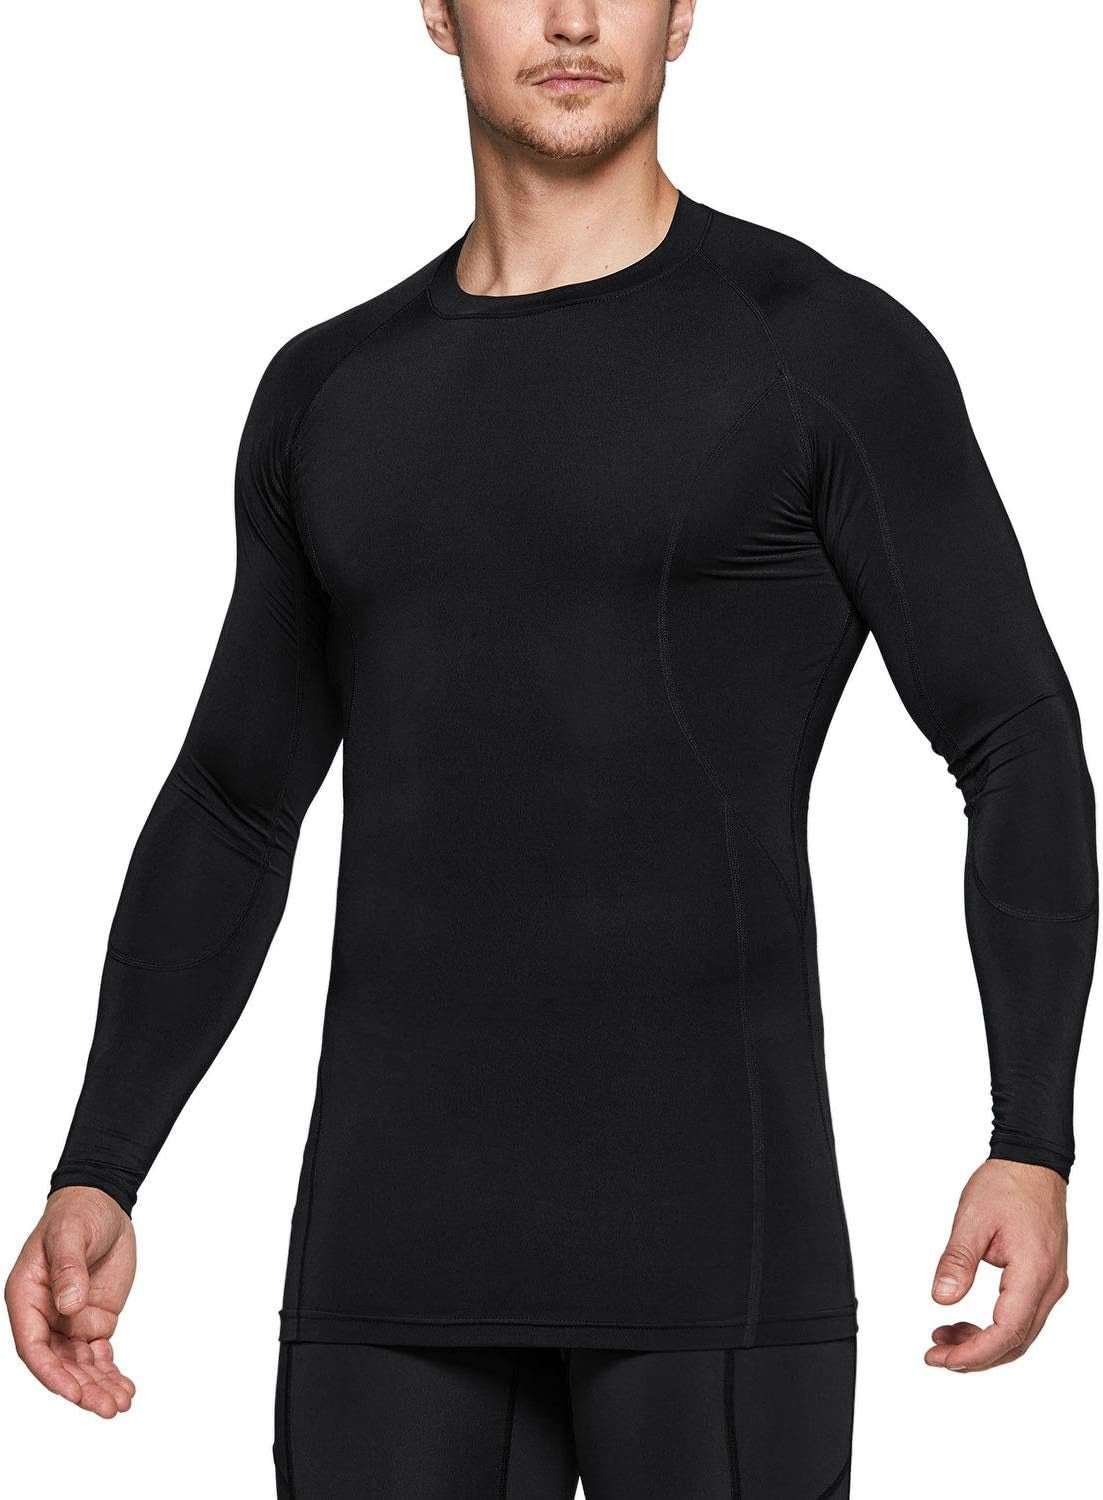 1 or 3 Pack Men'S UPF 50+ Long Sleeve Compression Shirts, Athletic Workout Shirt, Water Sports Rash Guard